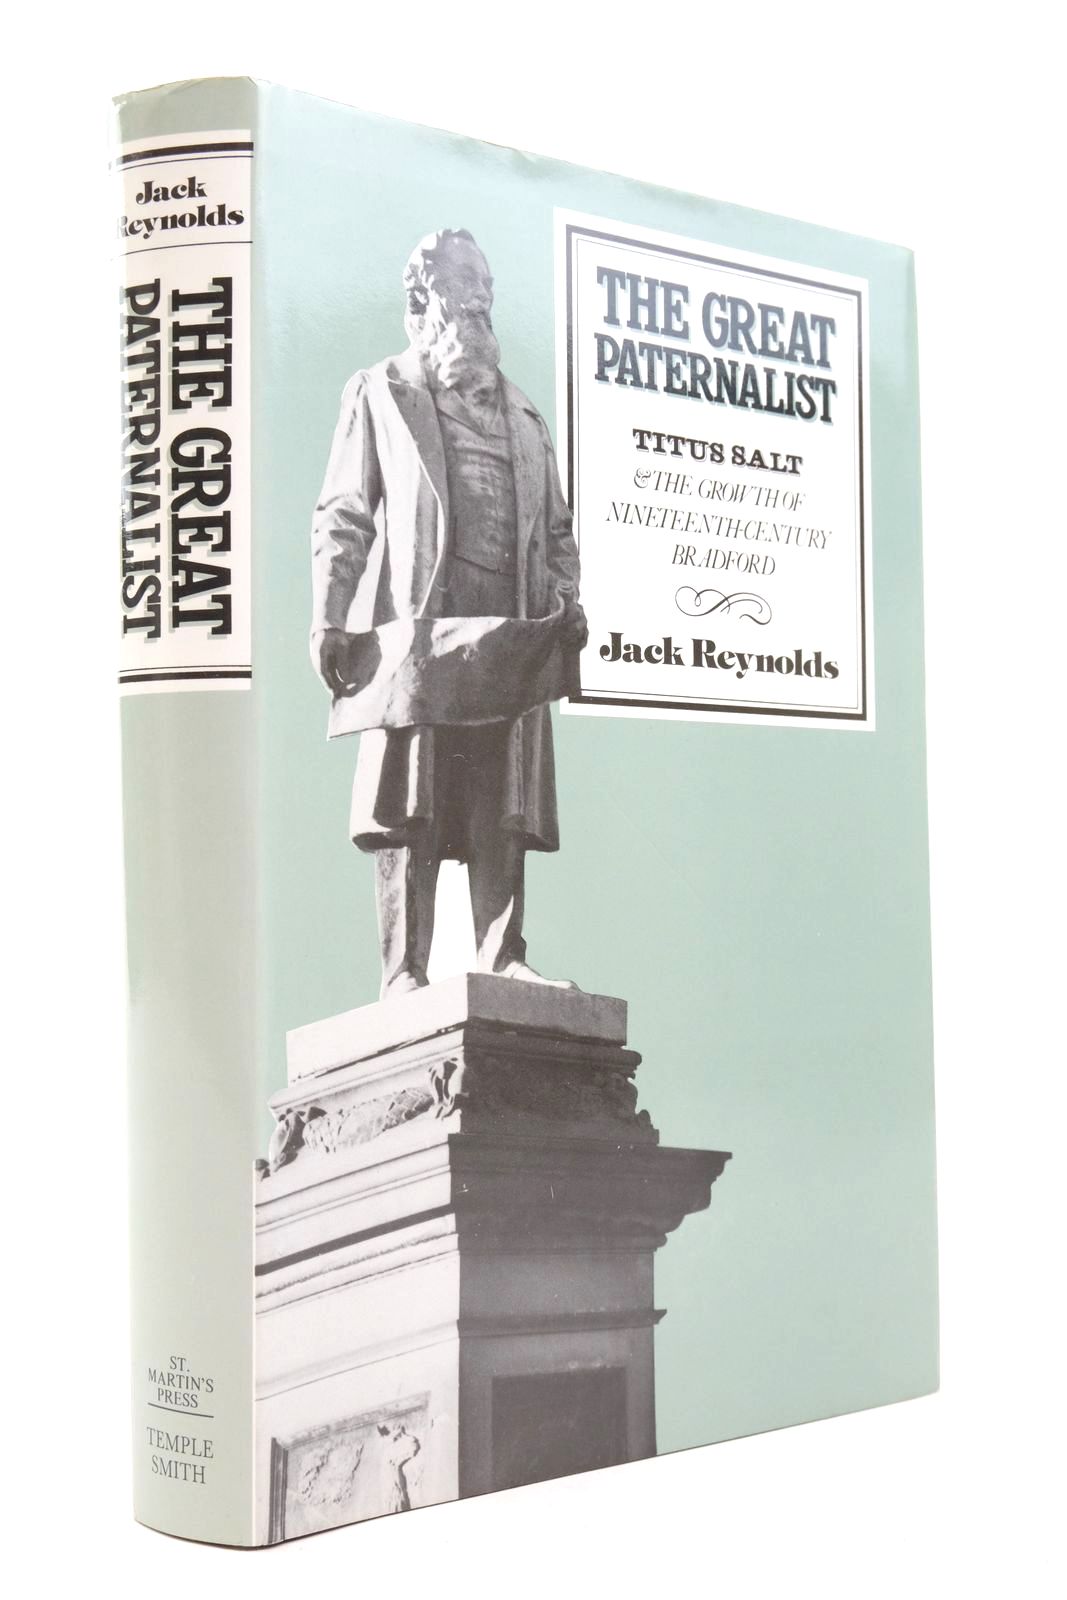 Photo of THE GREAT PATERNALIST: TITUS SALT AND THE GROWTH OF NINETEENTH-CENTURY BRADFORD written by Reynolds, Jack published by Maurice Temple Smith Ltd, University of Bradford (STOCK CODE: 2137217)  for sale by Stella & Rose's Books